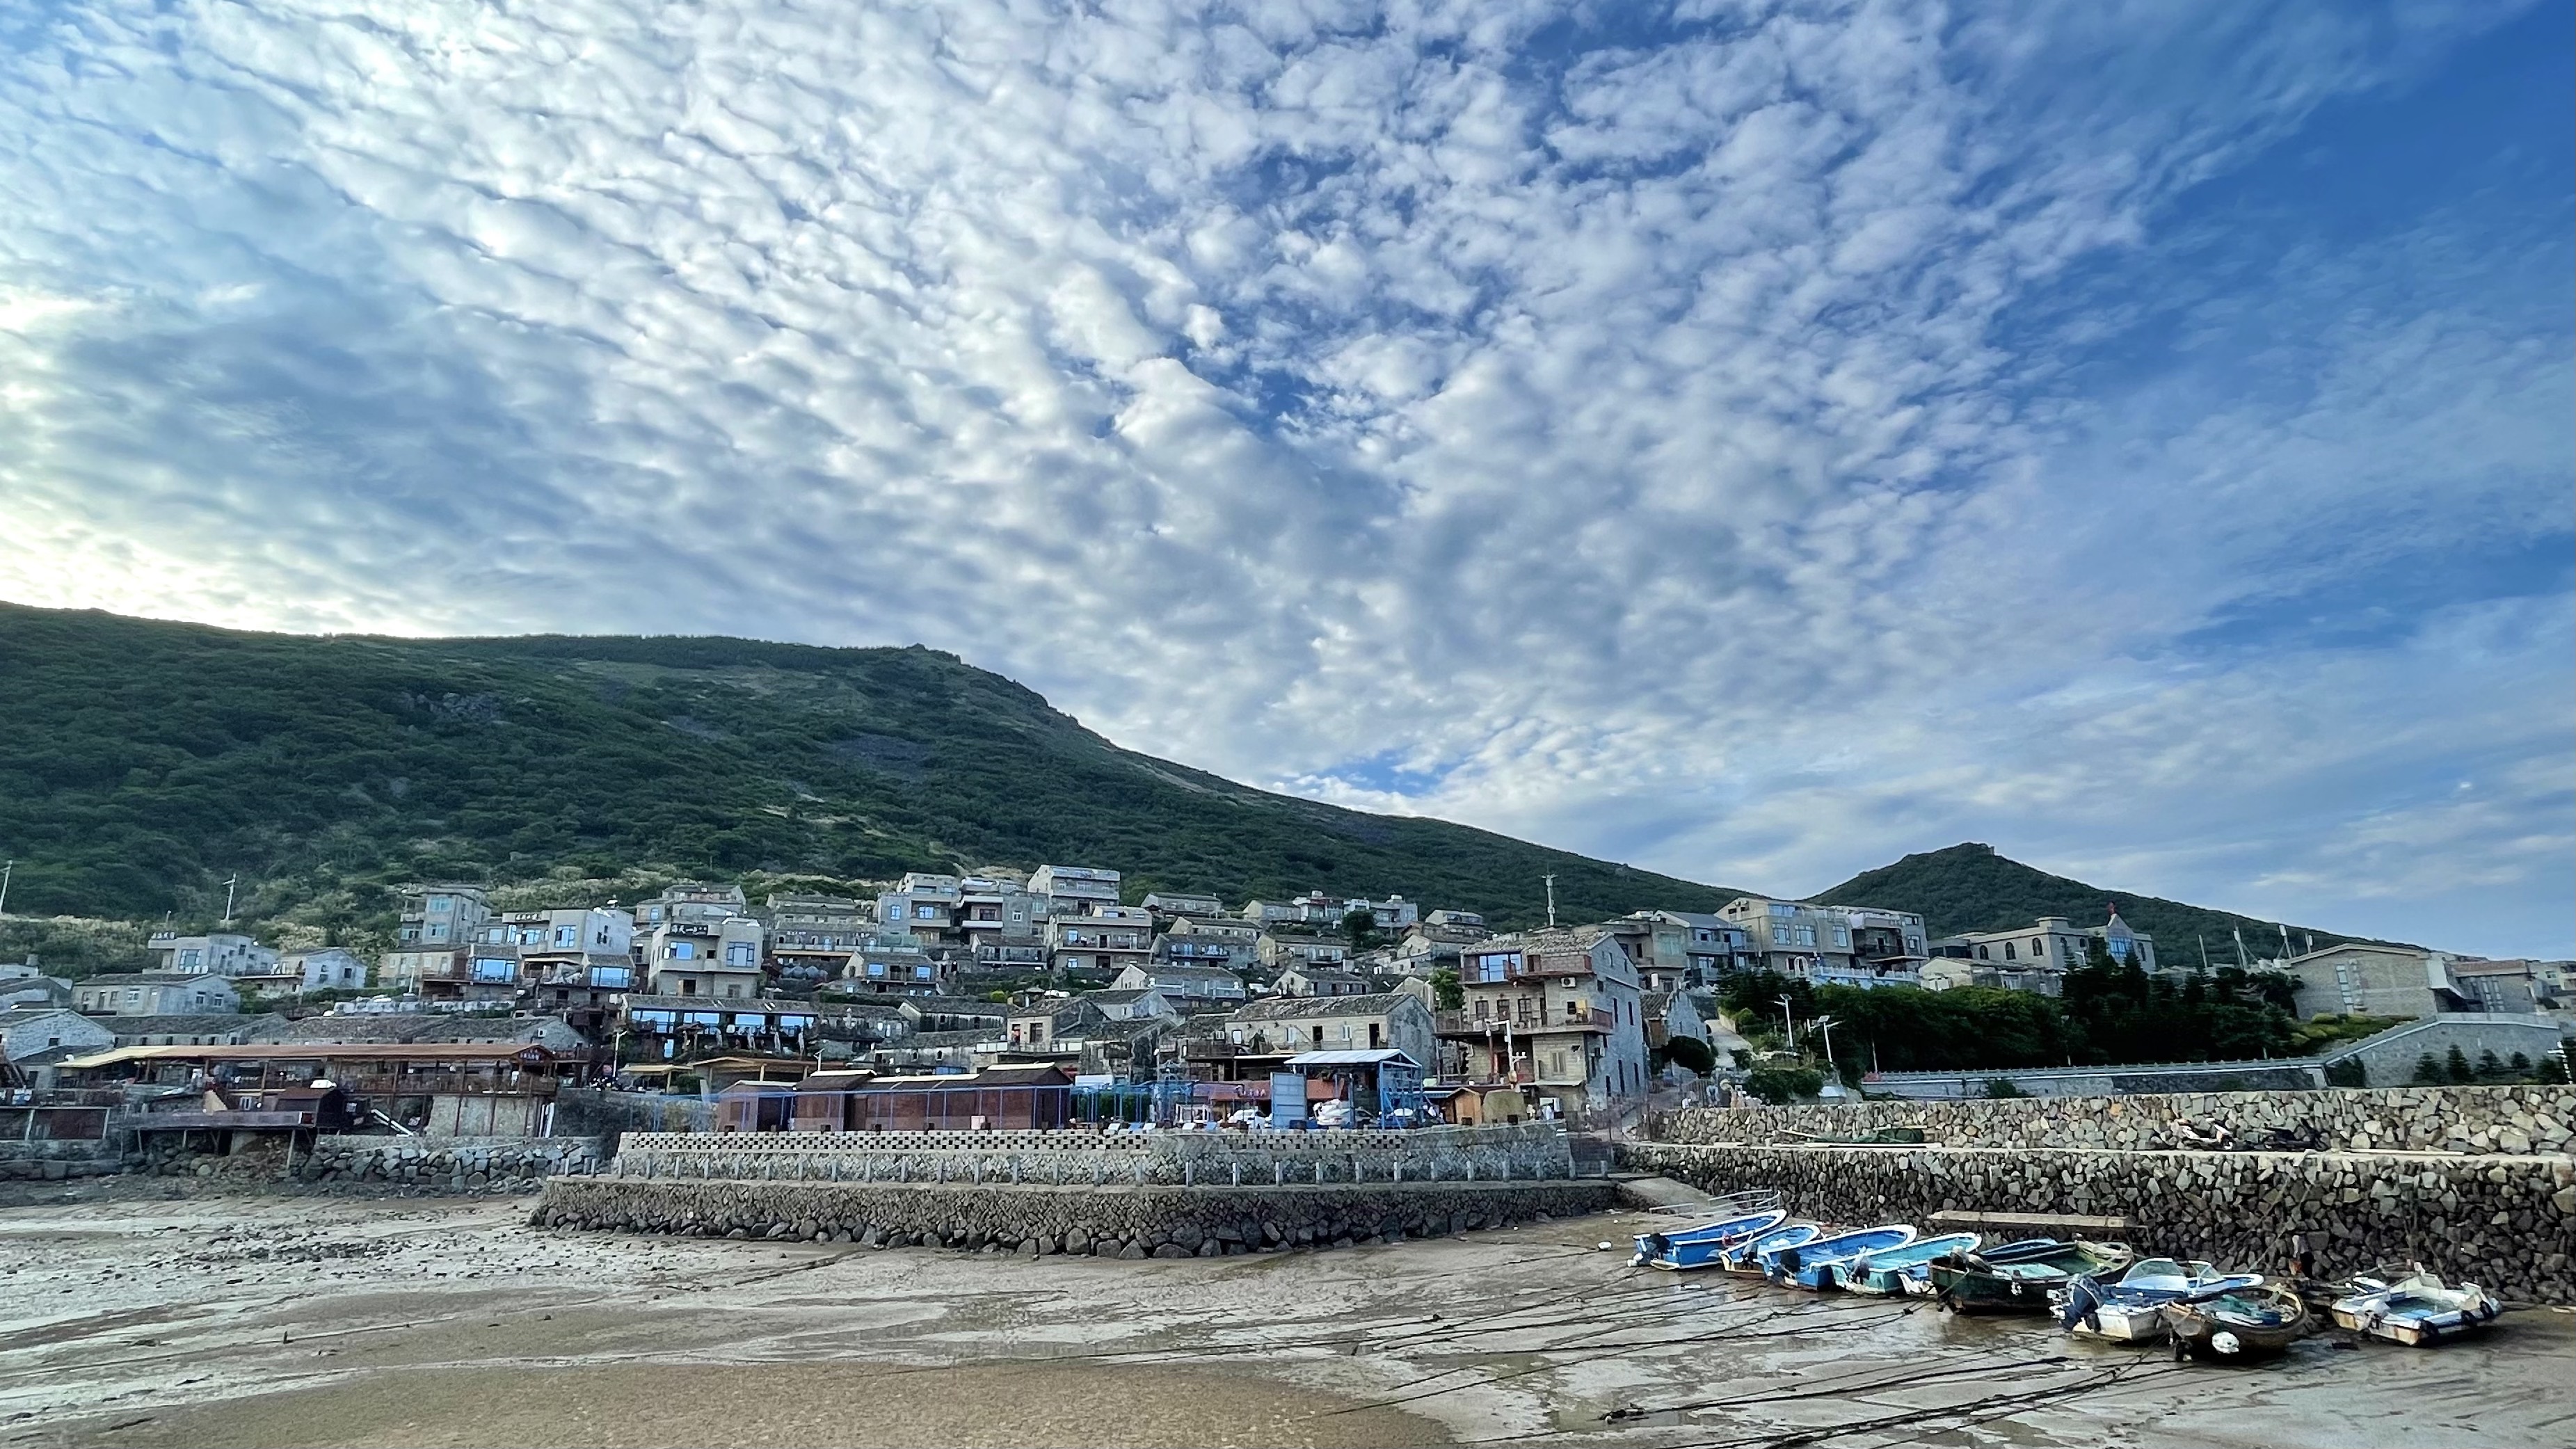 Beigang Village is a historic fishing village situated on Pingtan Island's northeastern corner, where old stone masonry buildings stand close to each other on a hillside by the sea, in Fujian Province, southeast China. Hong Yaobin/CGTN